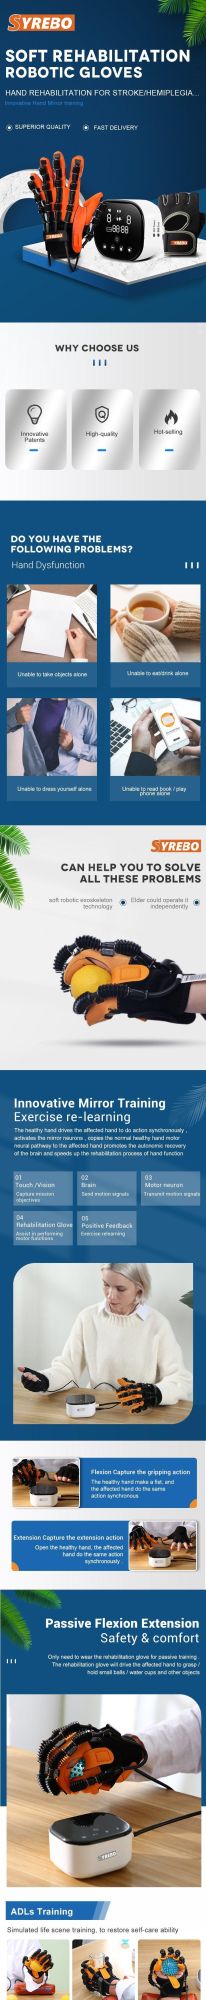 Premium-Version Finger-Training High-End Robotic Hand Rehabilitation Robot Equipment for Stroke Patient with Air Wave Glove